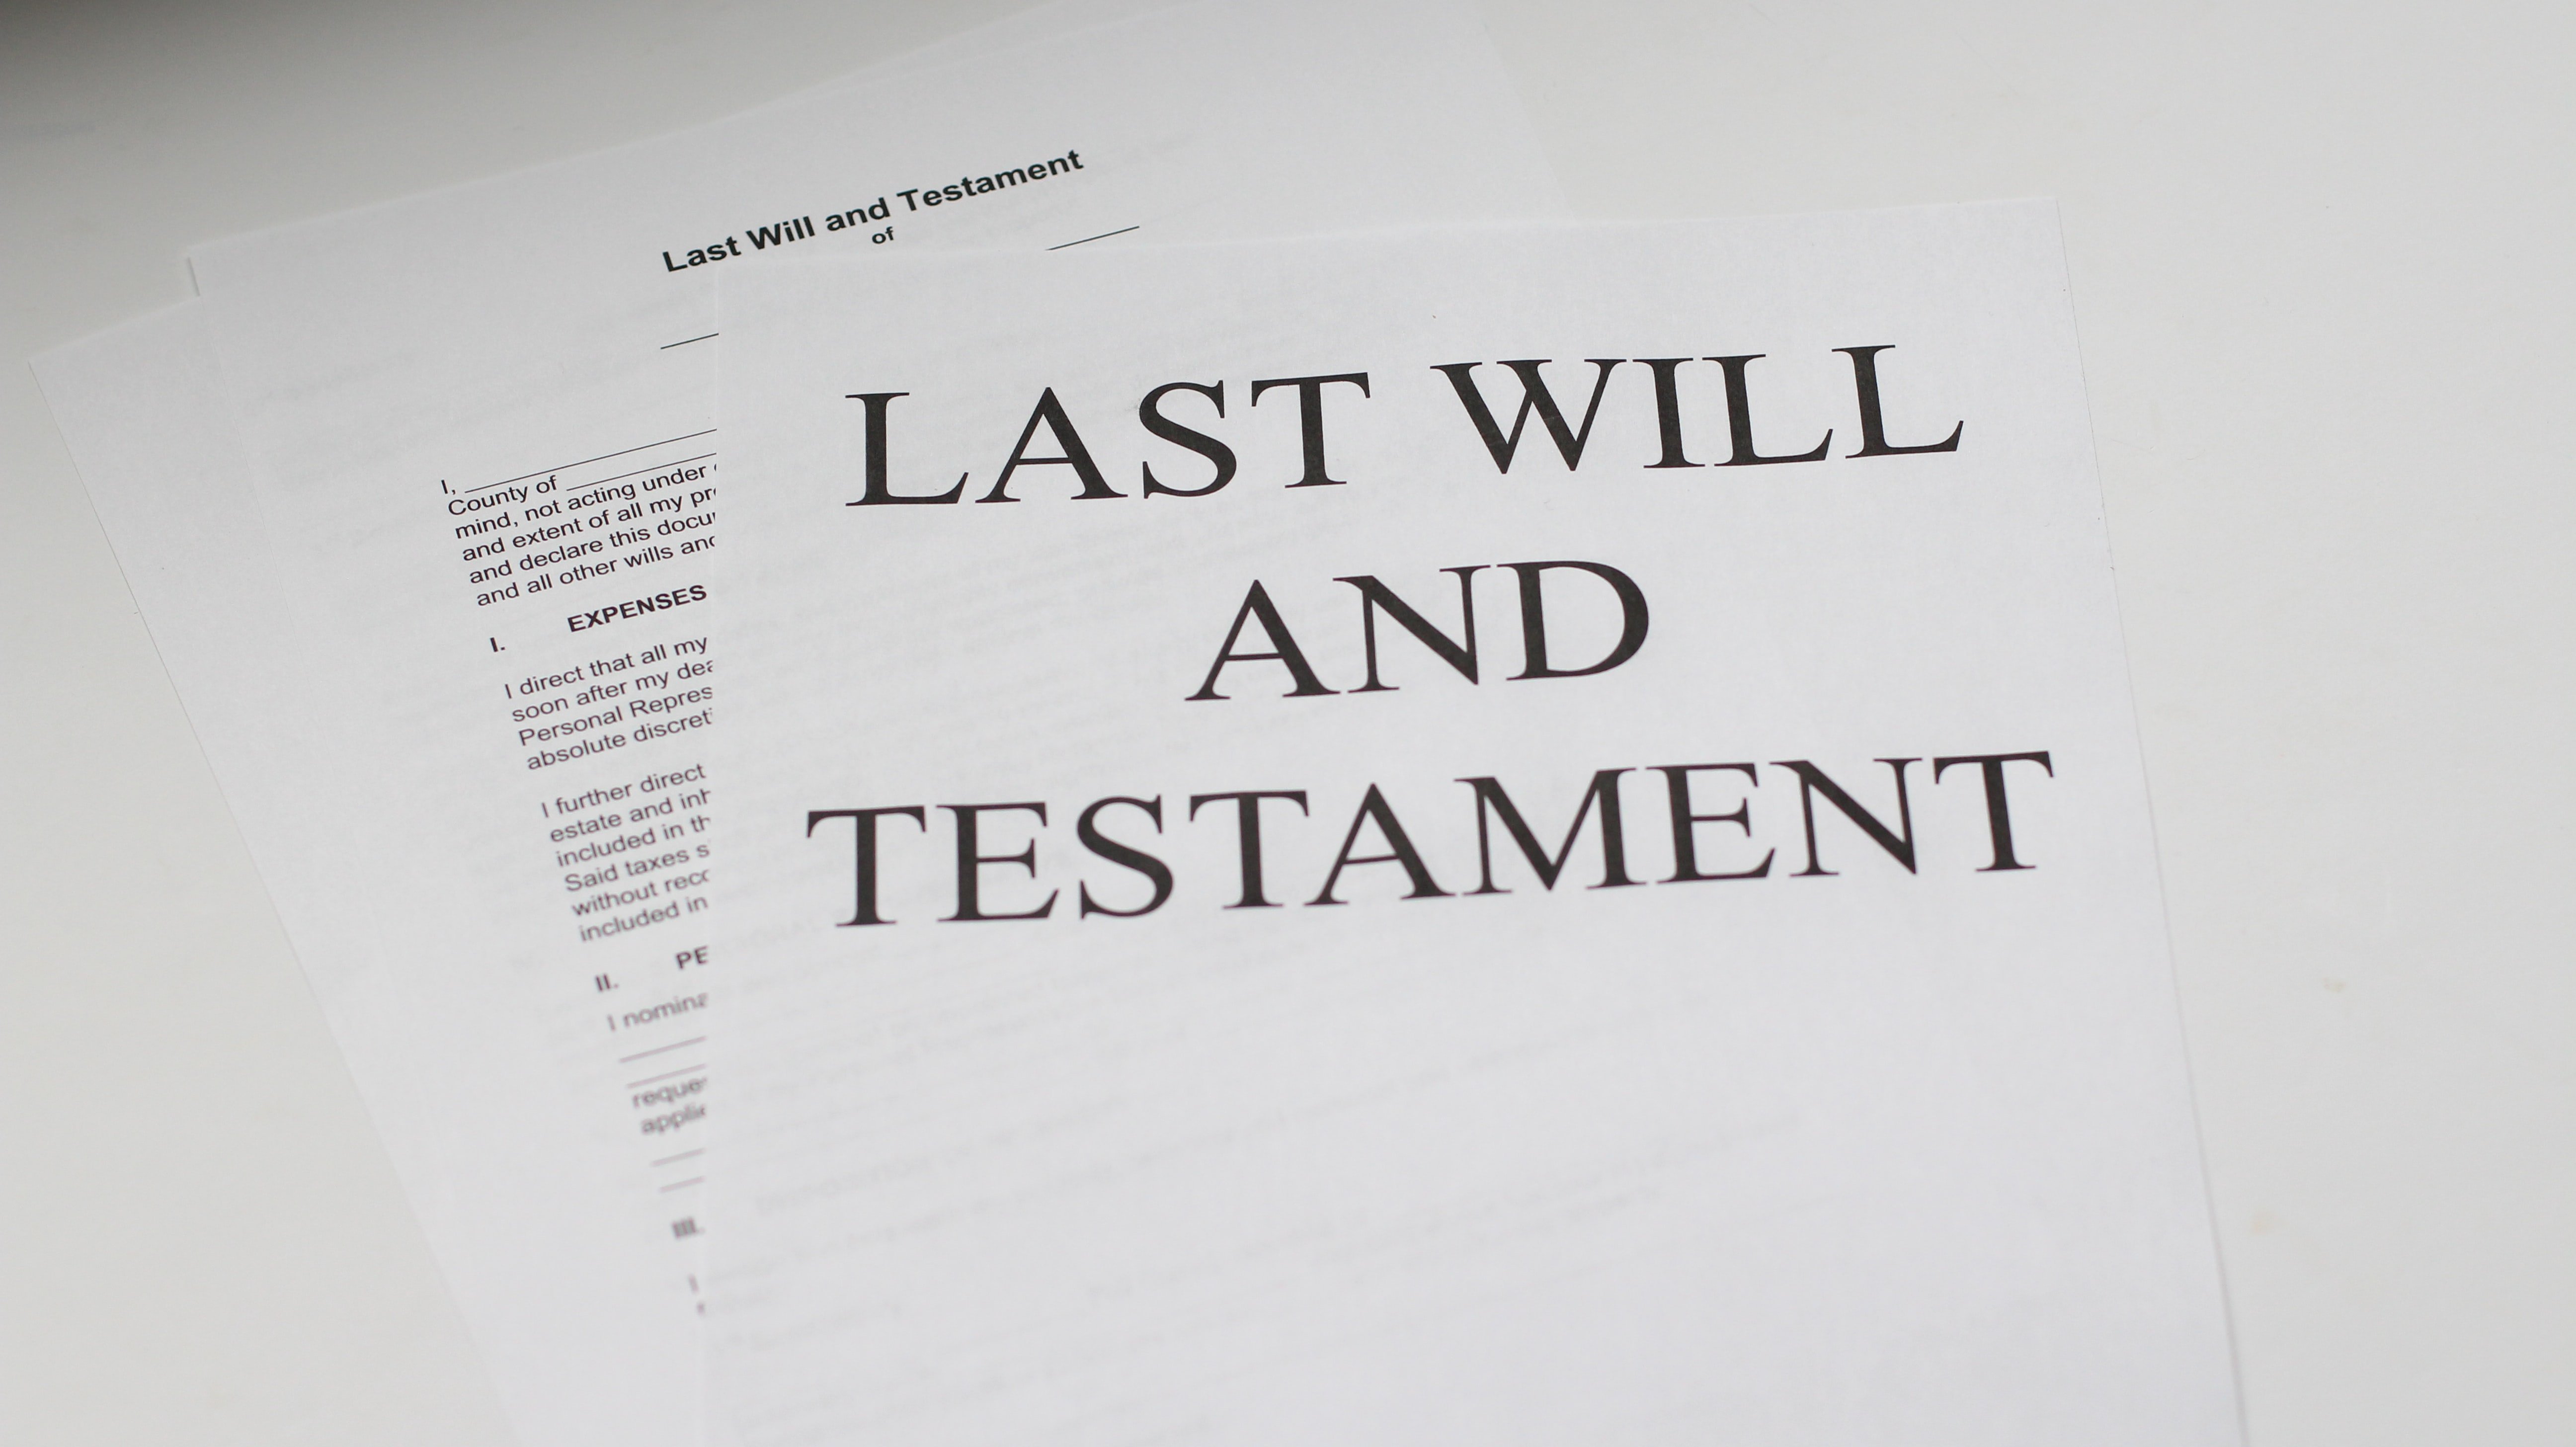 Apparently, John left a will, but he will leave all his assets to his secretary, Elaine |  Source: Pexels